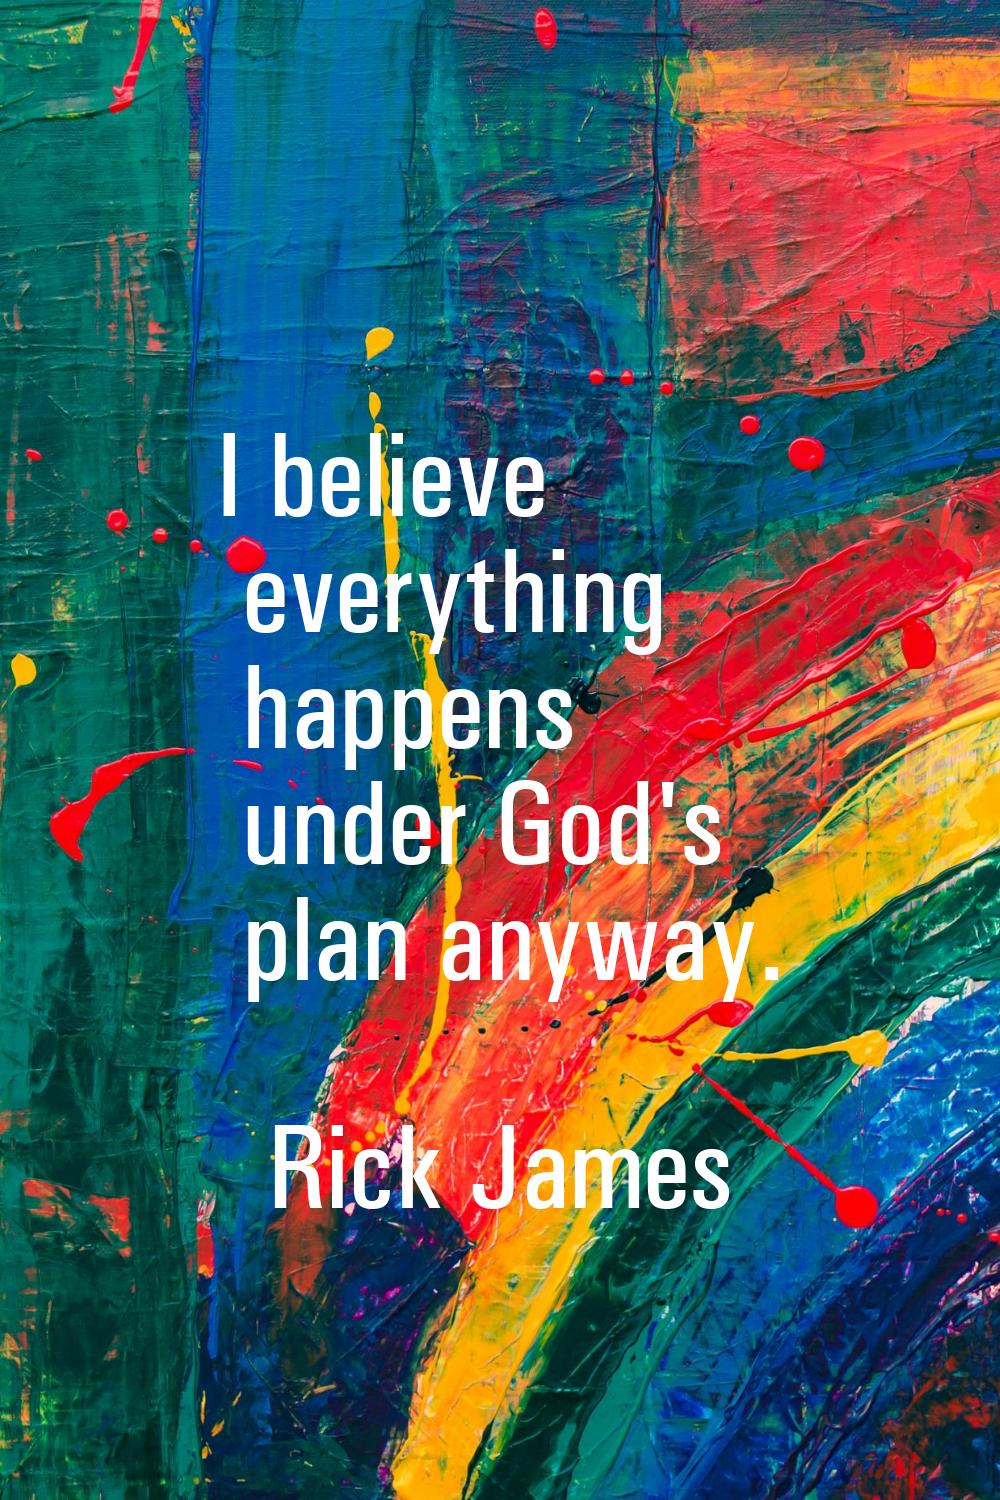 I believe everything happens under God's plan anyway.